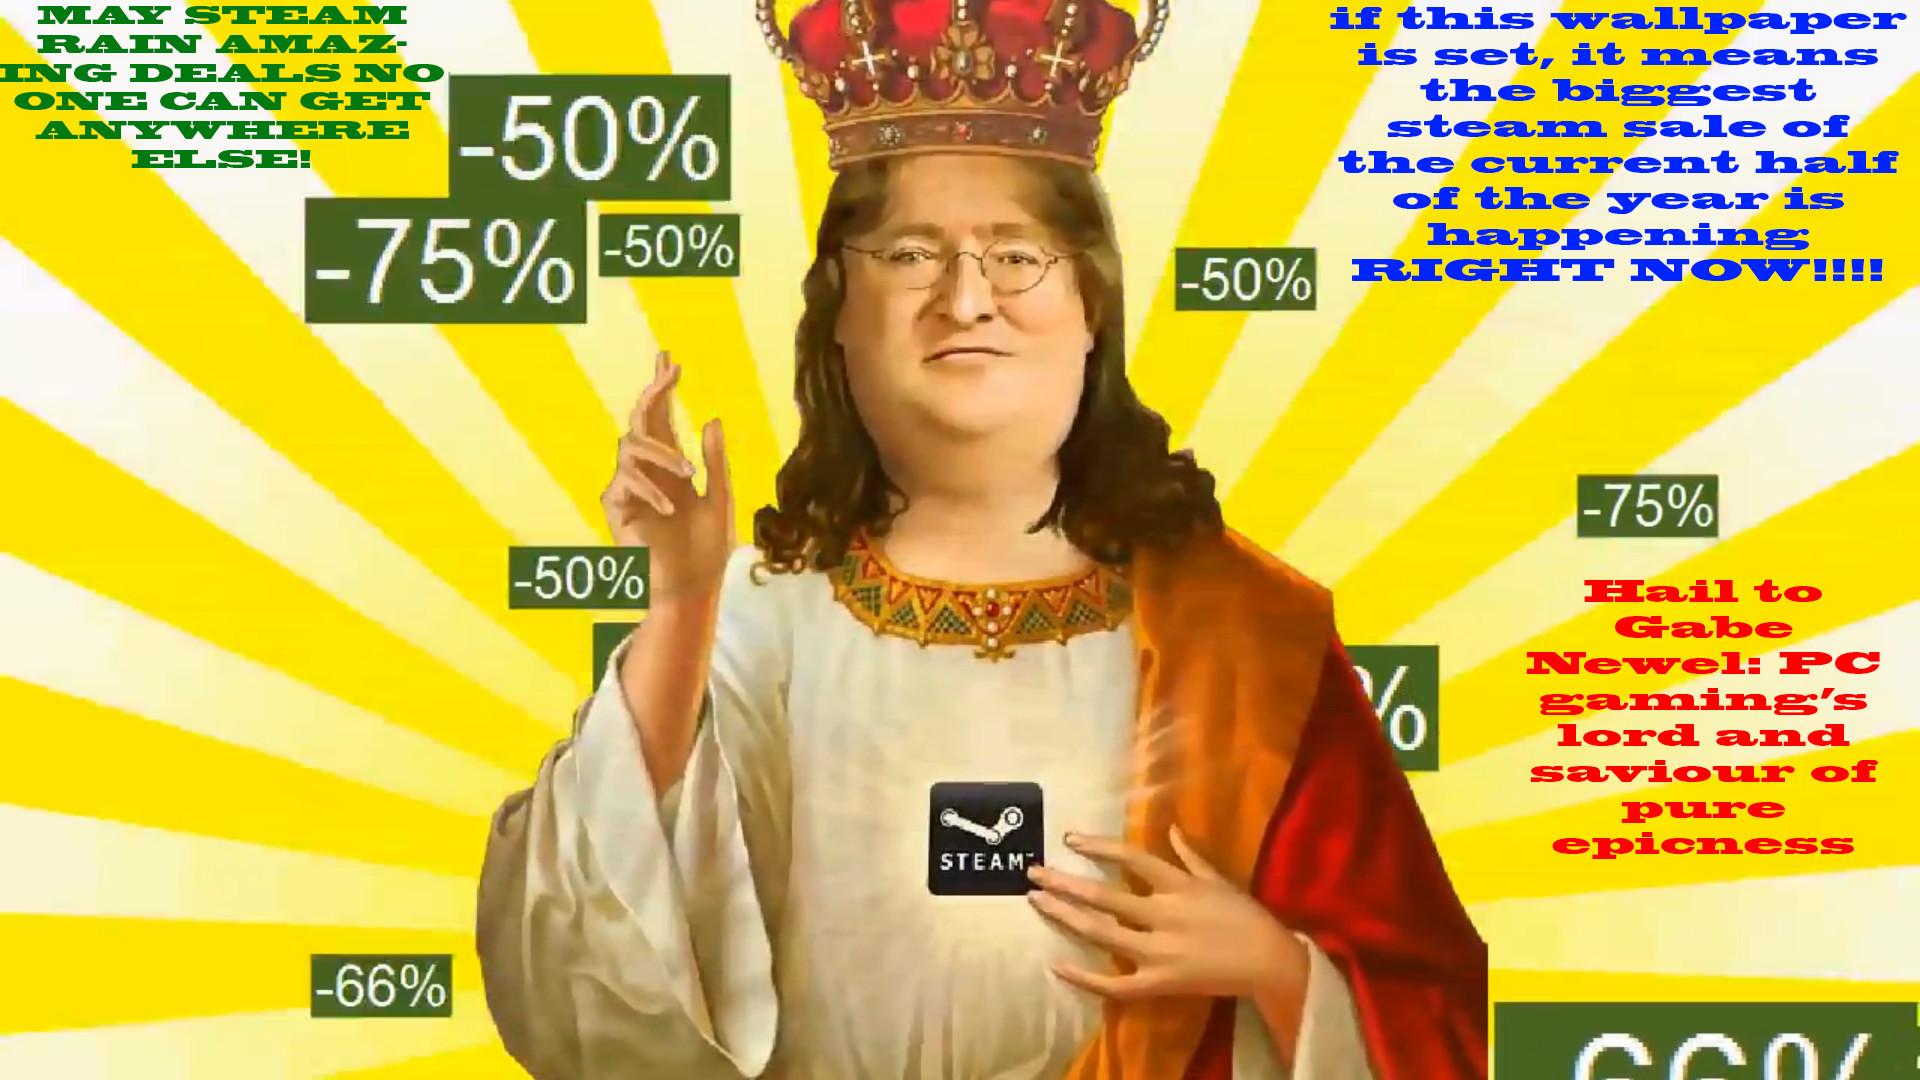 Gabe Newell Wallpaper , Find HD Wallpaper For Free